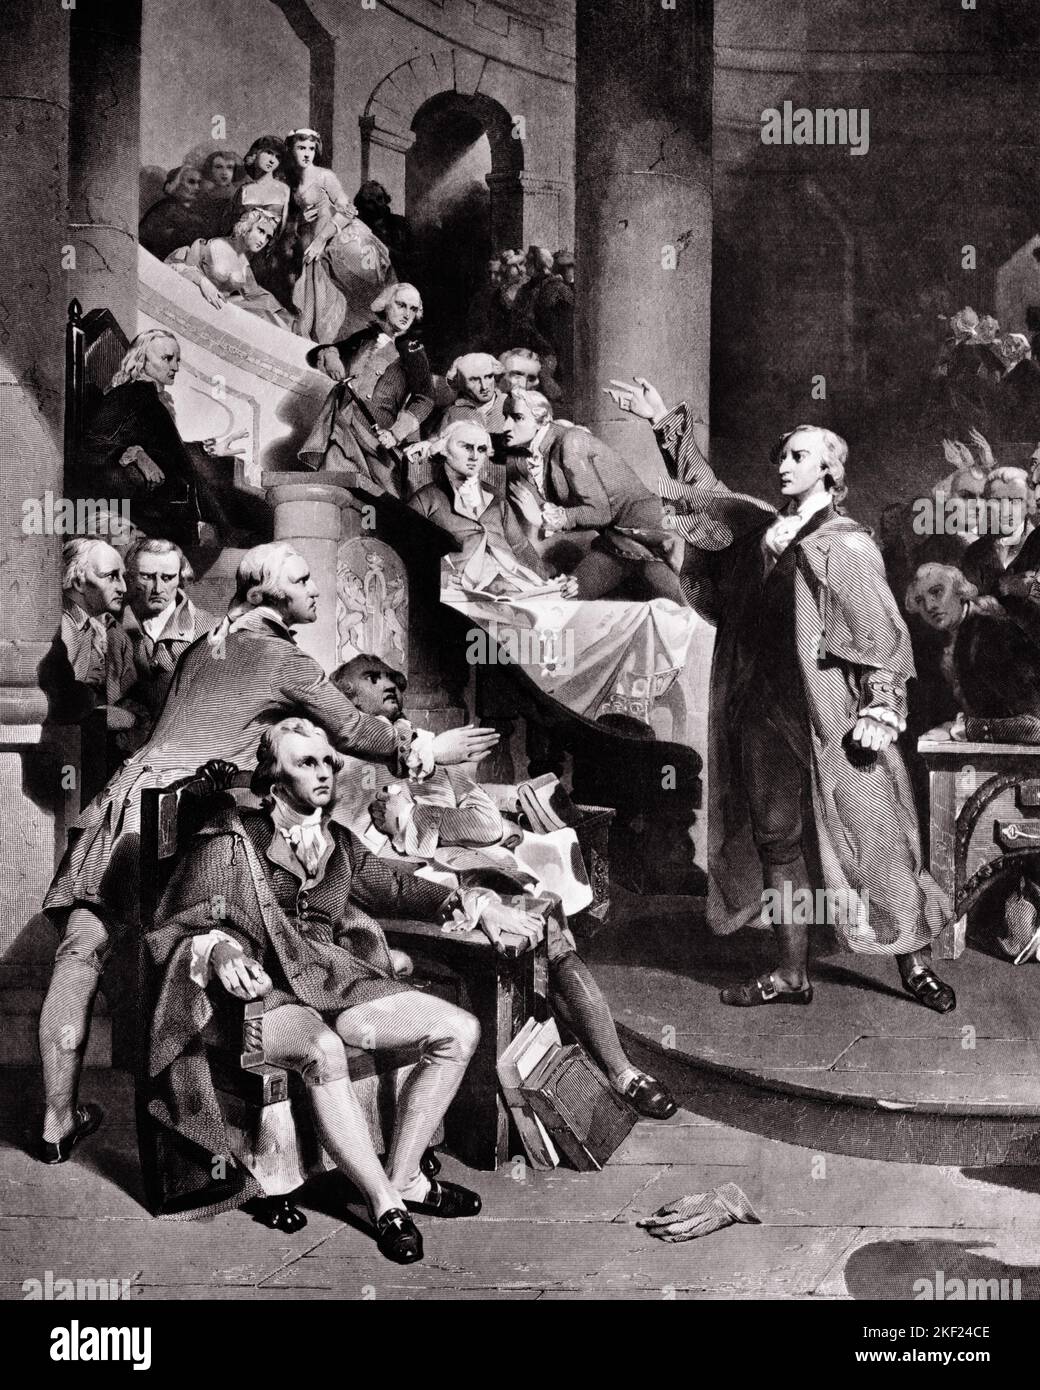 1770s 1775 PATRICK HENRY DELIVERING HIS GIVE ME LIBERTY OR GIVE ME DEATH SPEECH TO THE SECOND VIRGINIA CONVENTION IN RICHMOND VA - a6170 SPL001 HARS CONCEPTUAL SECOND PLANTER REVOLT AMERICAN REVOLUTIONARY WAR OR 1770s COLONIES IDEAS PATRICK STATESMAN VA 1775 BLACK AND WHITE FOUNDING FATHER HENRY OLD FASHIONED RICHMOND Stock Photo